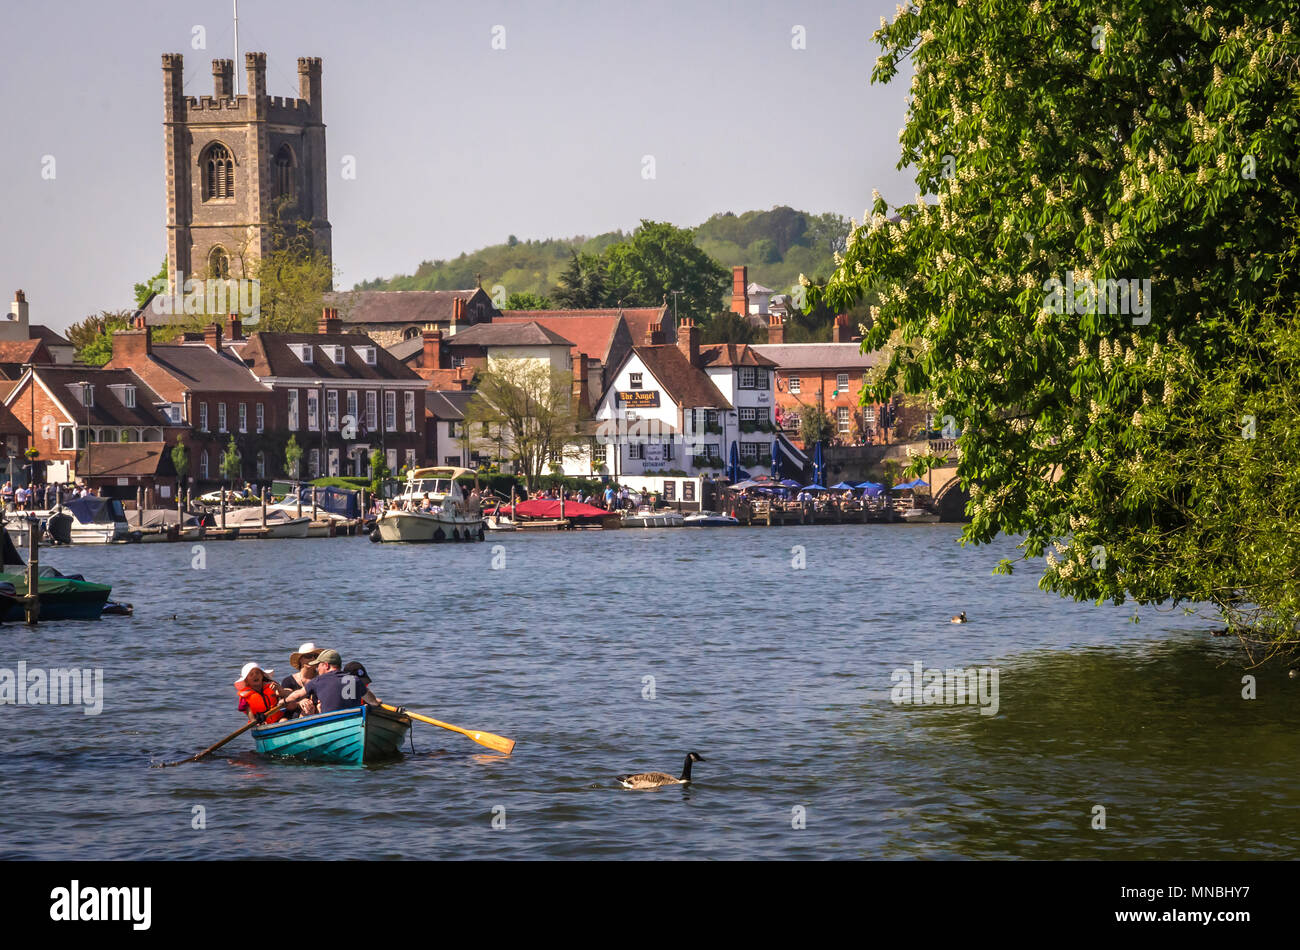 OXFORDSHIRE, UK - MAY 06, 2018: Family enjoying sunny day in boat at Henley on Thames. Henley is overlooked by a beautiful landscape of wooden hills. Stock Photo